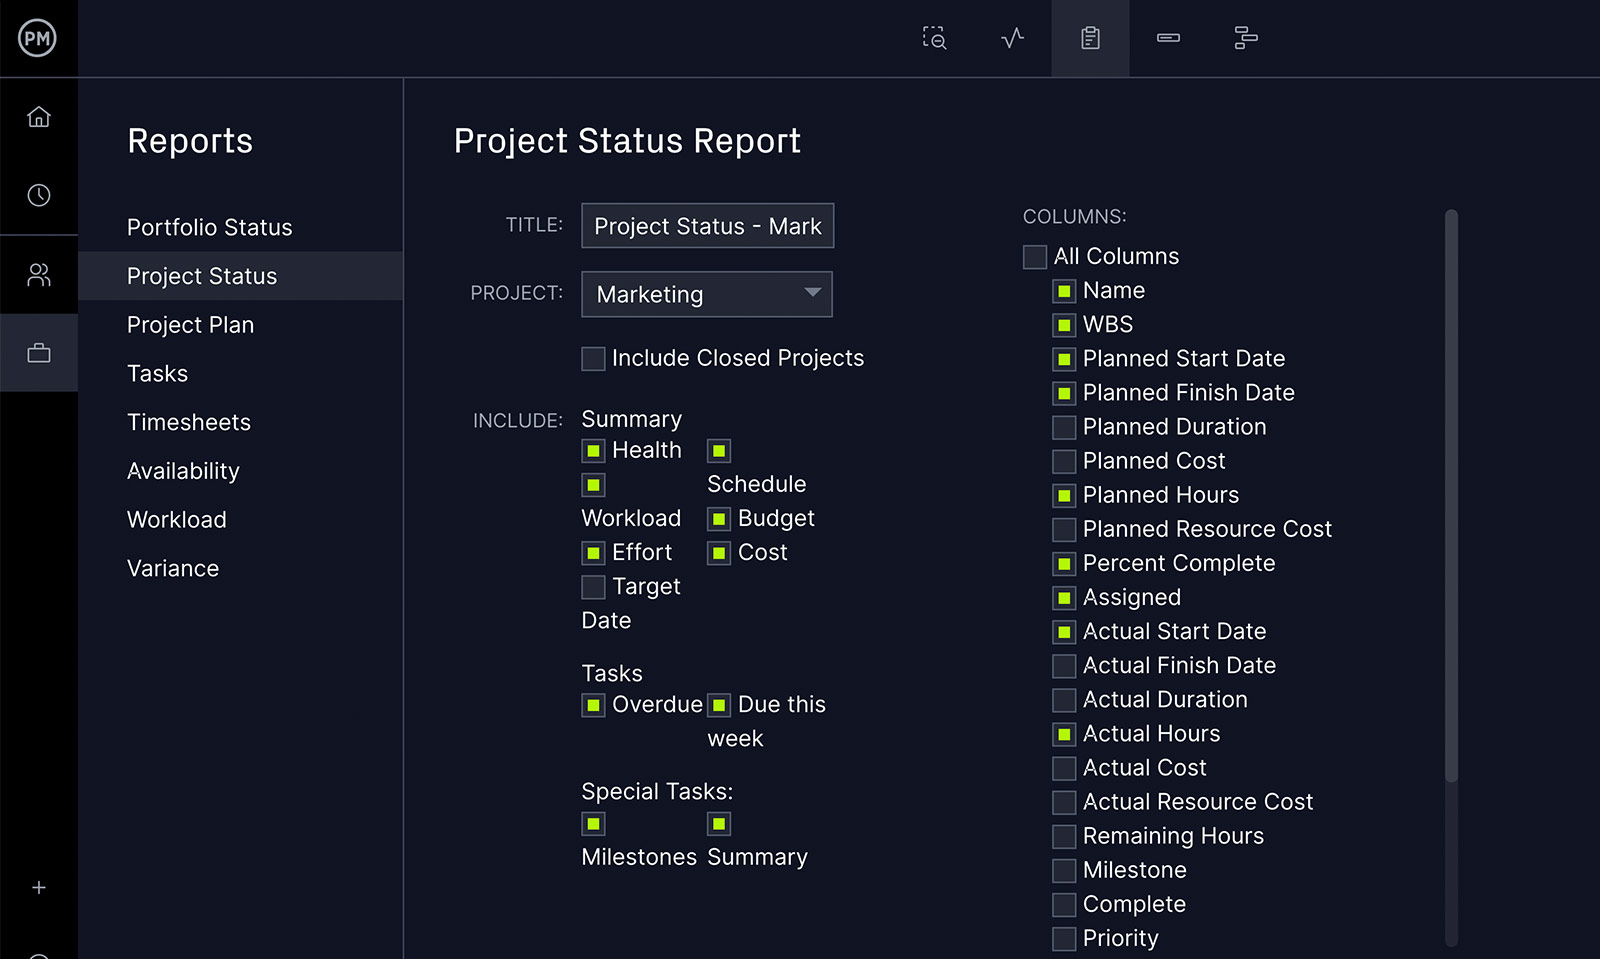 Print and share portfolio management reports with ProjectManager's PMO software built-in reporting features